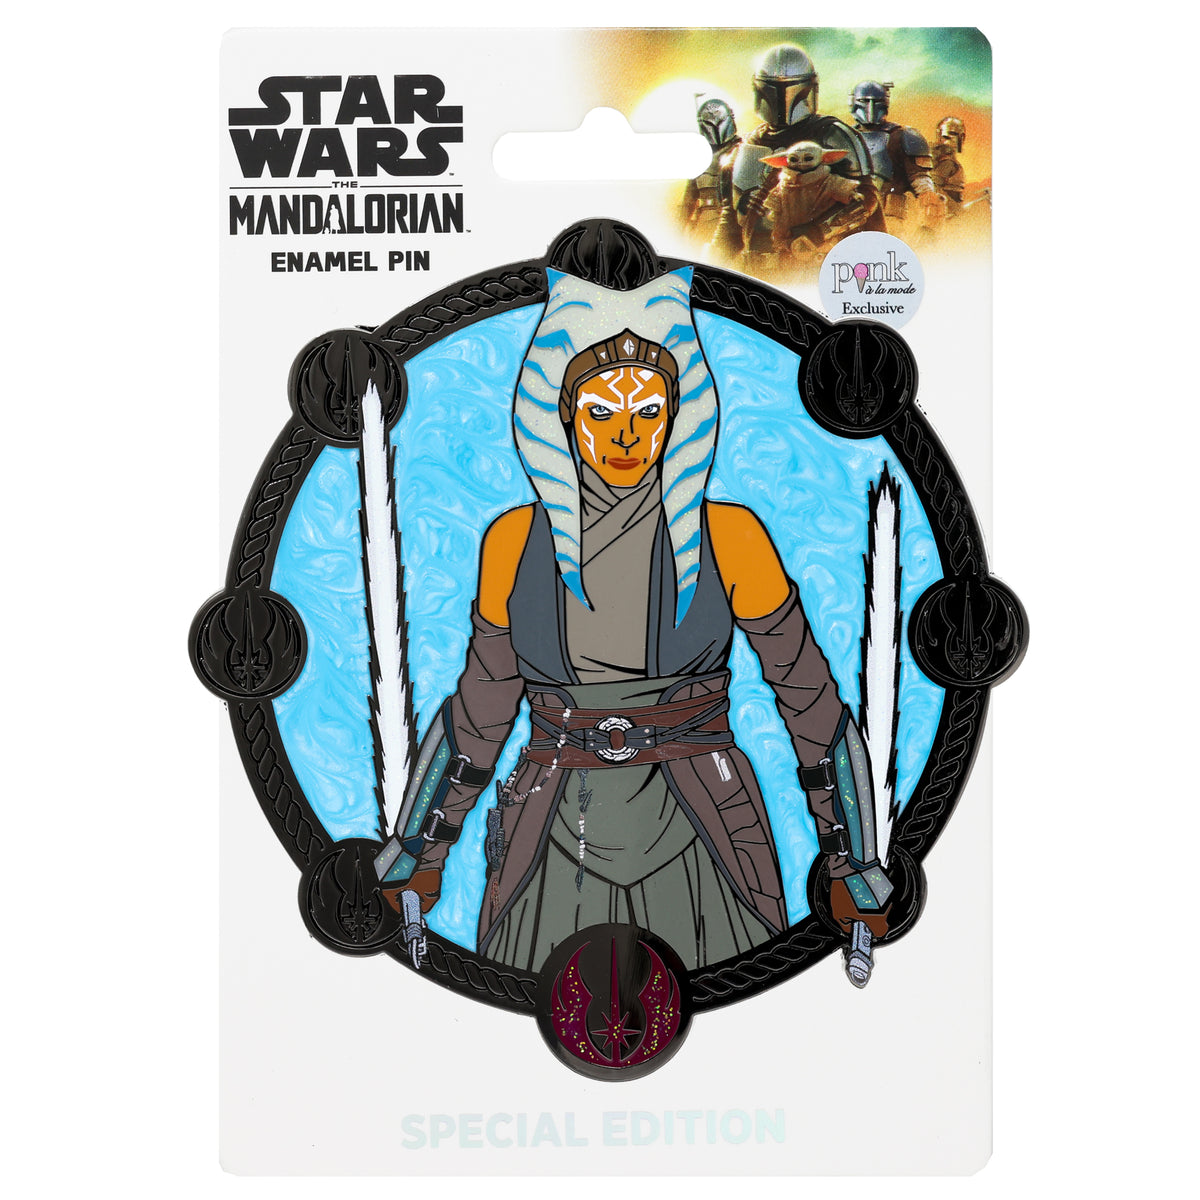 Star Wars Iconic Series - Ahsoka Tano Special Edition 300 - NEW RELEASE